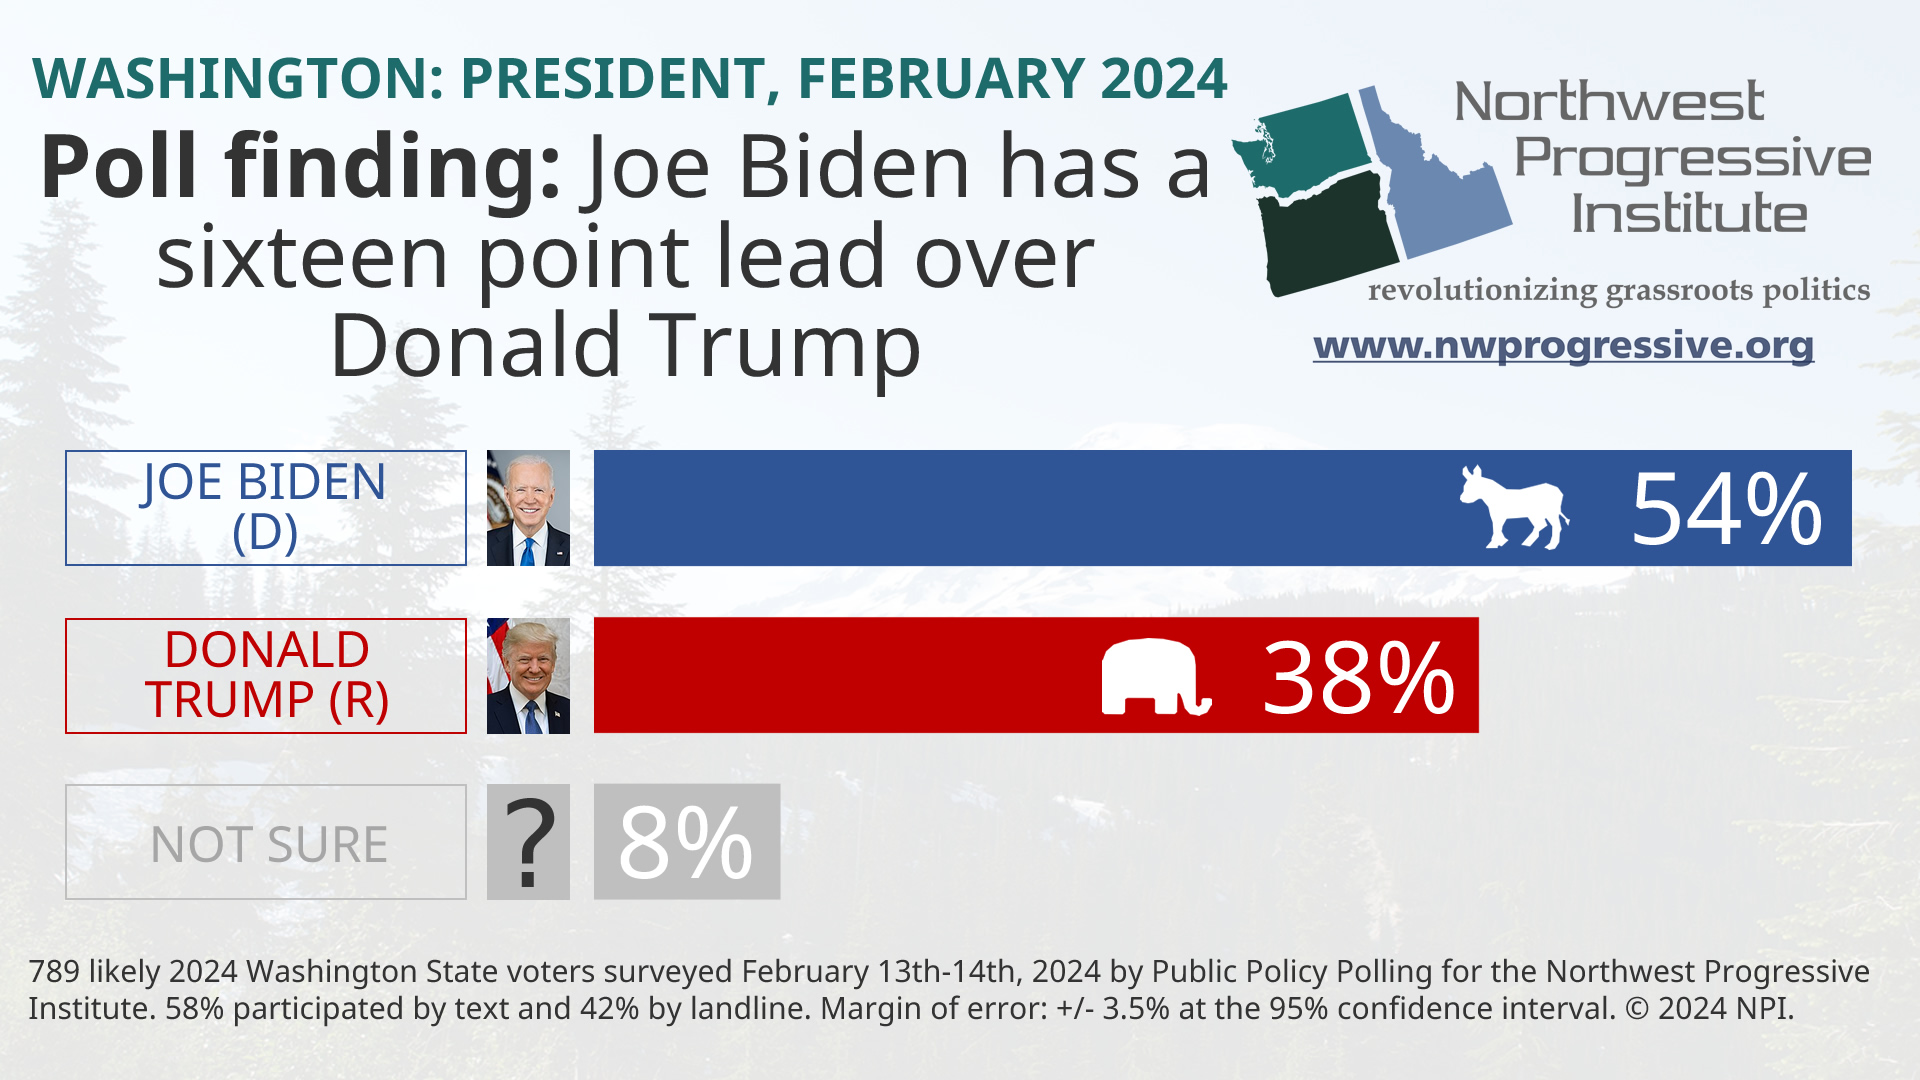 Visualization of NPI's February 2024 presidential poll finding